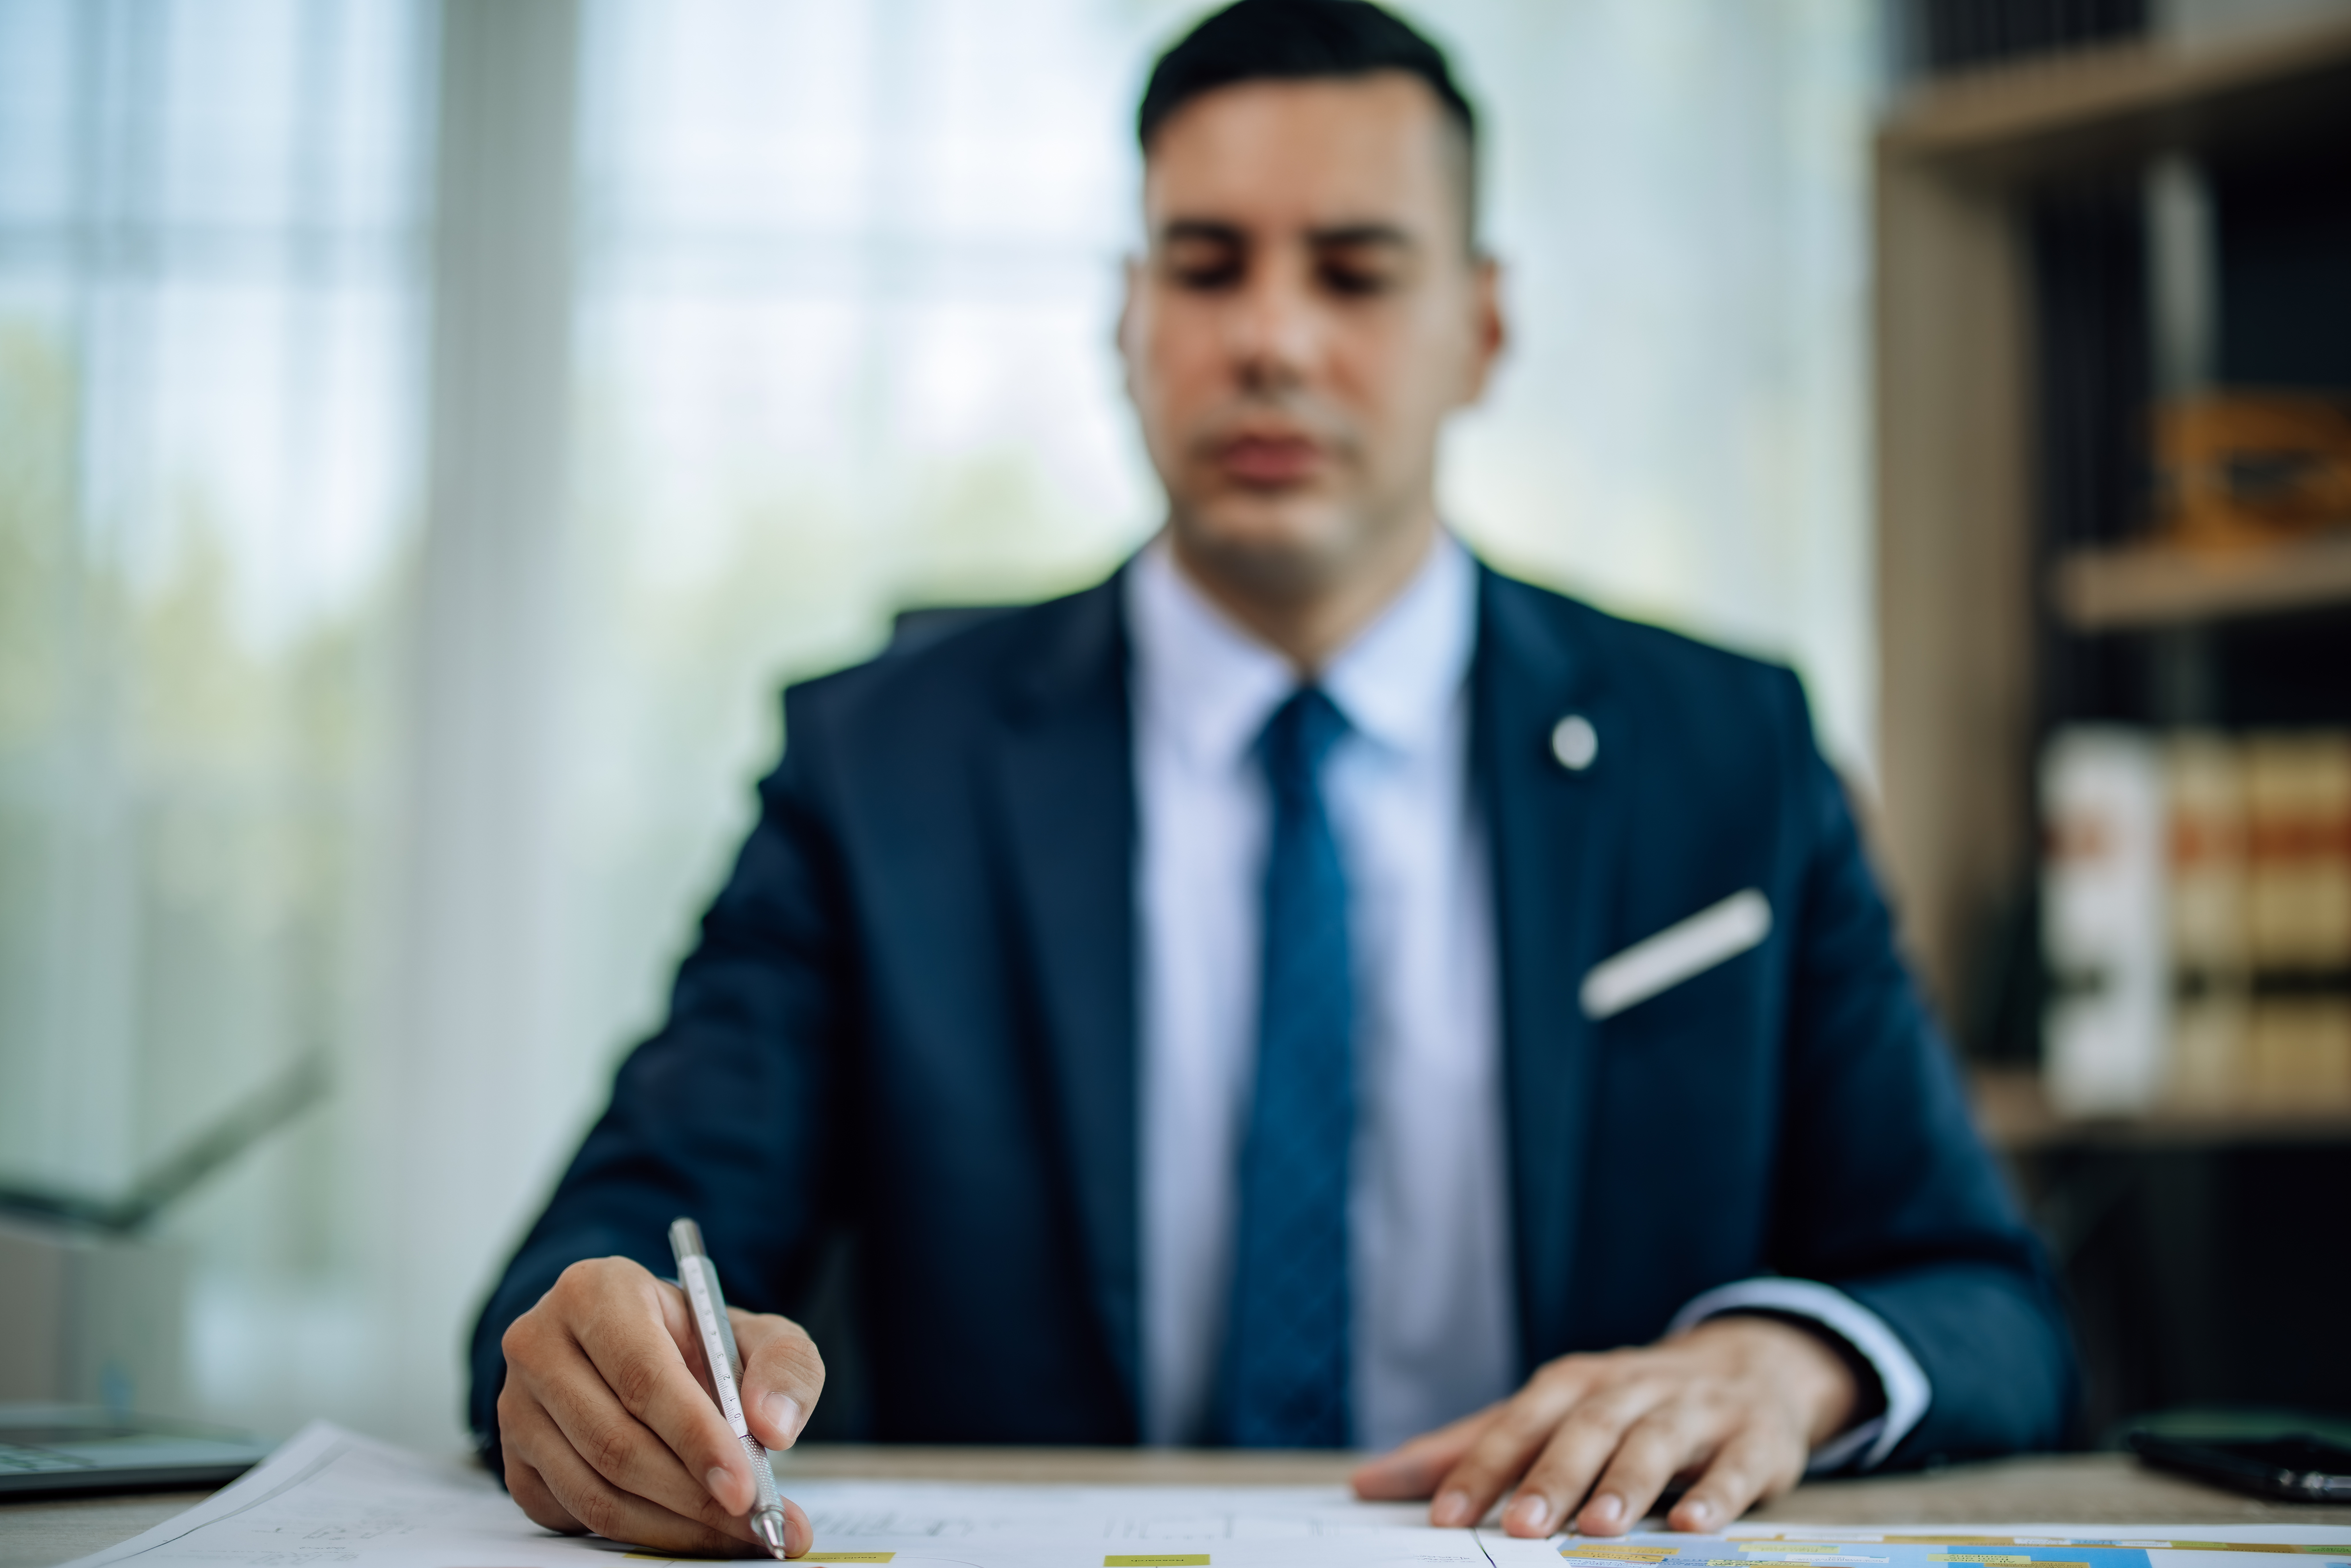 The determined business supervisor carefully analyzes the proposal contract before permitting. Once approved, the project is implemented with serious consideration, ensuring successful outcomes.